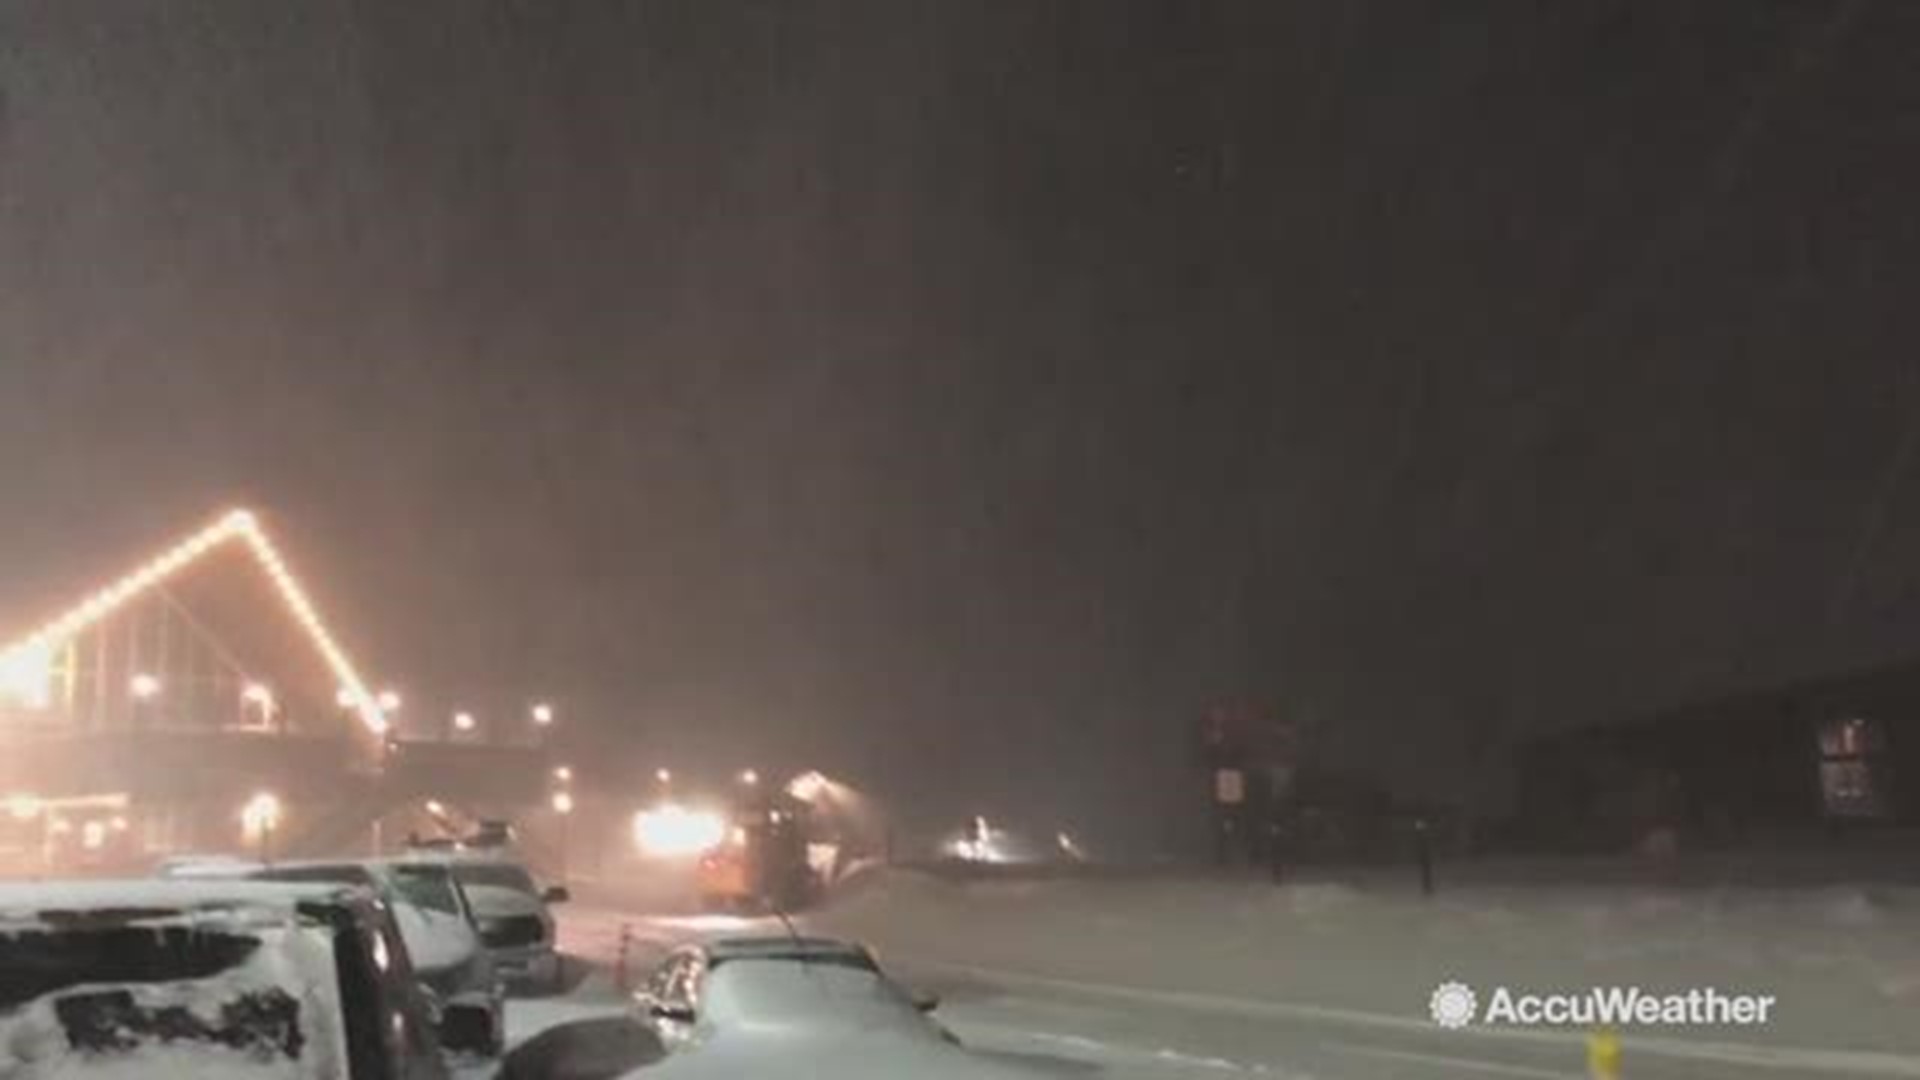 AccuWeather's Reed Timmer was excited as thundersnow rocked Mammoth Lakes, California, during a winter storm on January 17.